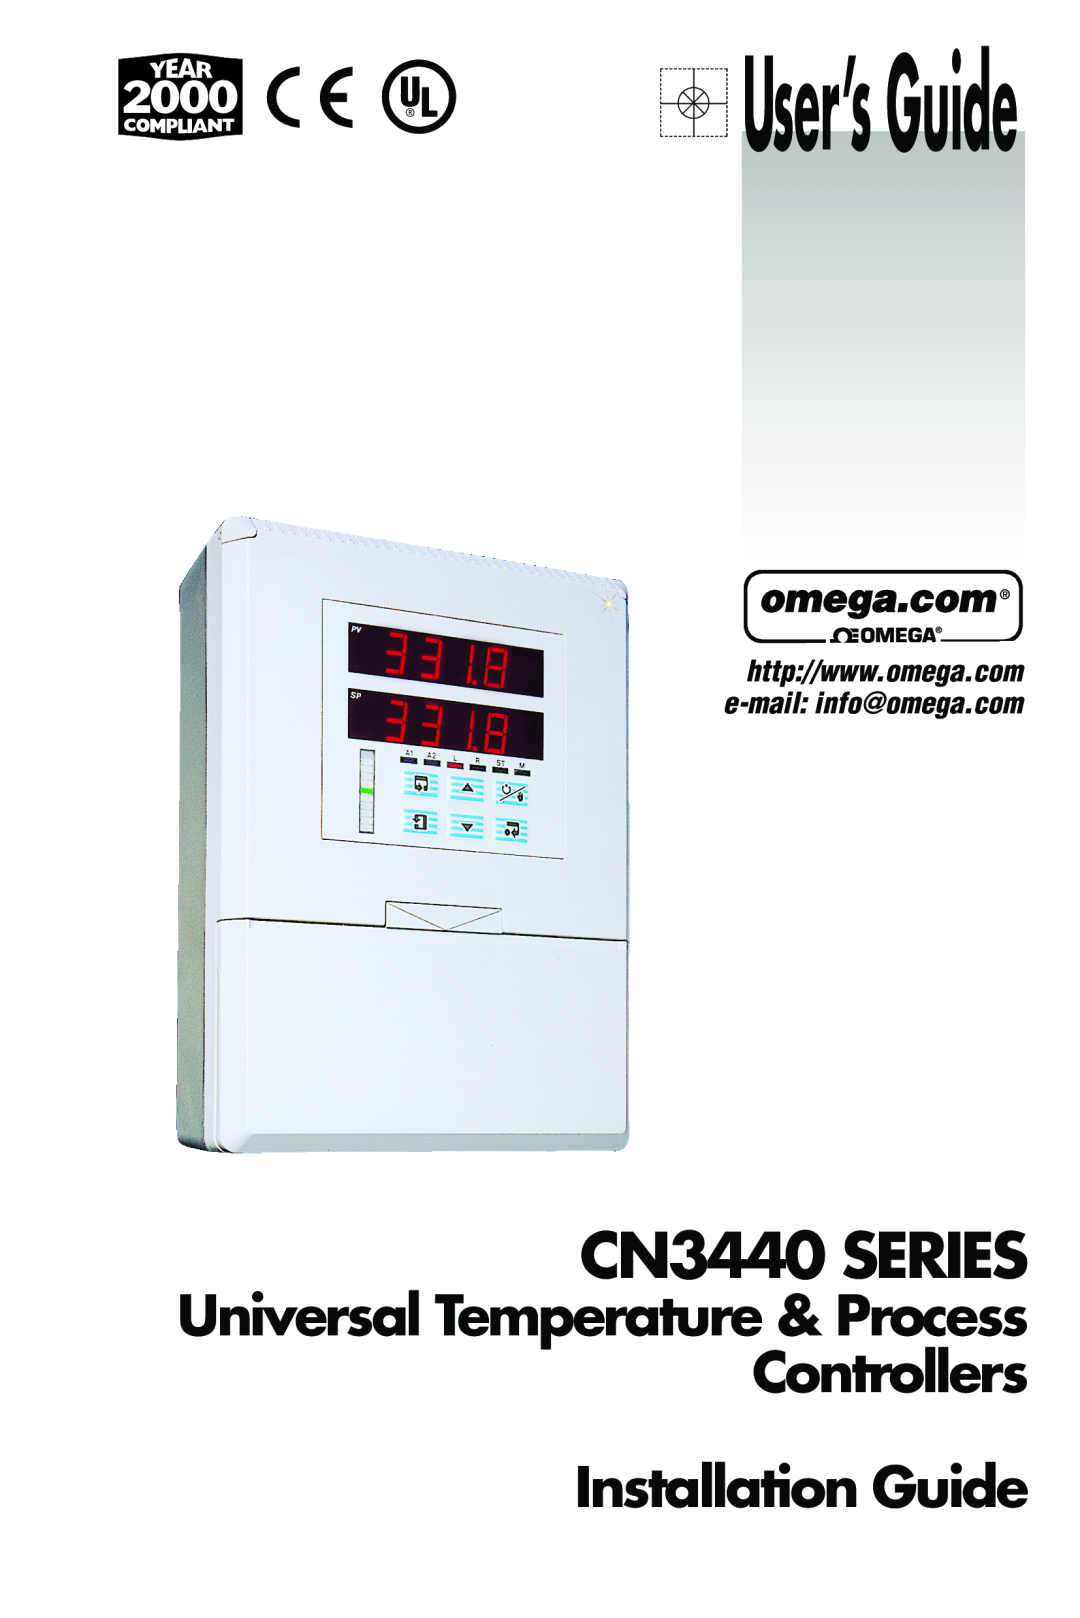 Omega manual User’s Guide, CN3440 SERIES, Installation Guide, Universal Temperature & Process Controllers 